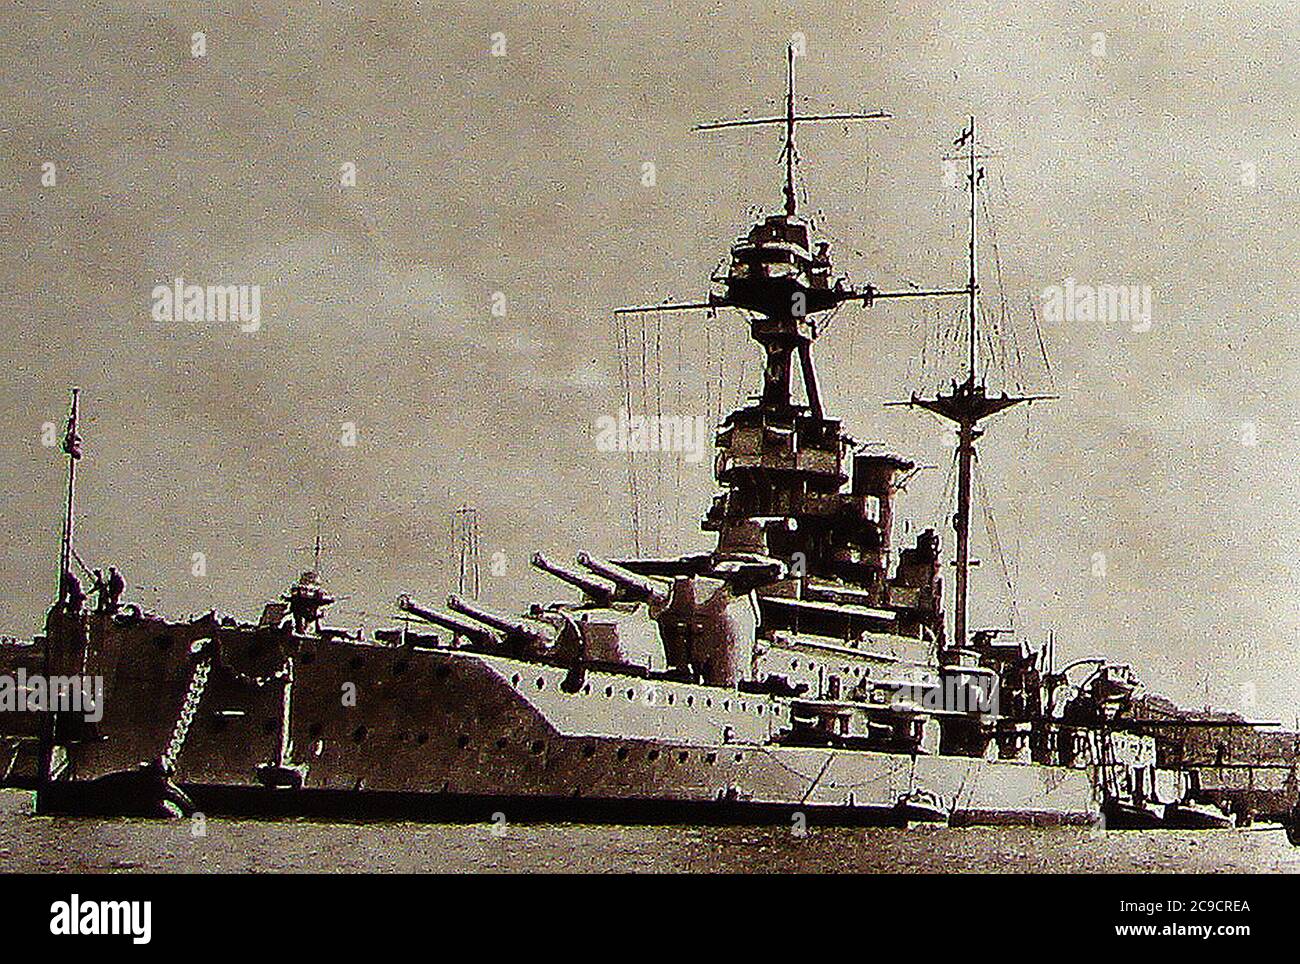 HMS Queen Elizabeth (launched Oct 16th 1913) . On this vessel the German fleet surrendered during WWI in November 1918. She was the lead ship of her class of dreadnought battleships built for the Royal Navy in the early 1910's and was rebuilt twice. (Pennant number: 00).  She along with HMS Valiant, was  seriously damaged by Italian frogmen Antonio Marceglia and Spartaco Schergat using ,  human torpedo mines  on 19 December 1941 in Alexandria harbour, Egypt. Nine men died.The vessel was scrapped in Dalmuir  Scotland  in July 1948 after being bought by  Arnott Young. Stock Photo